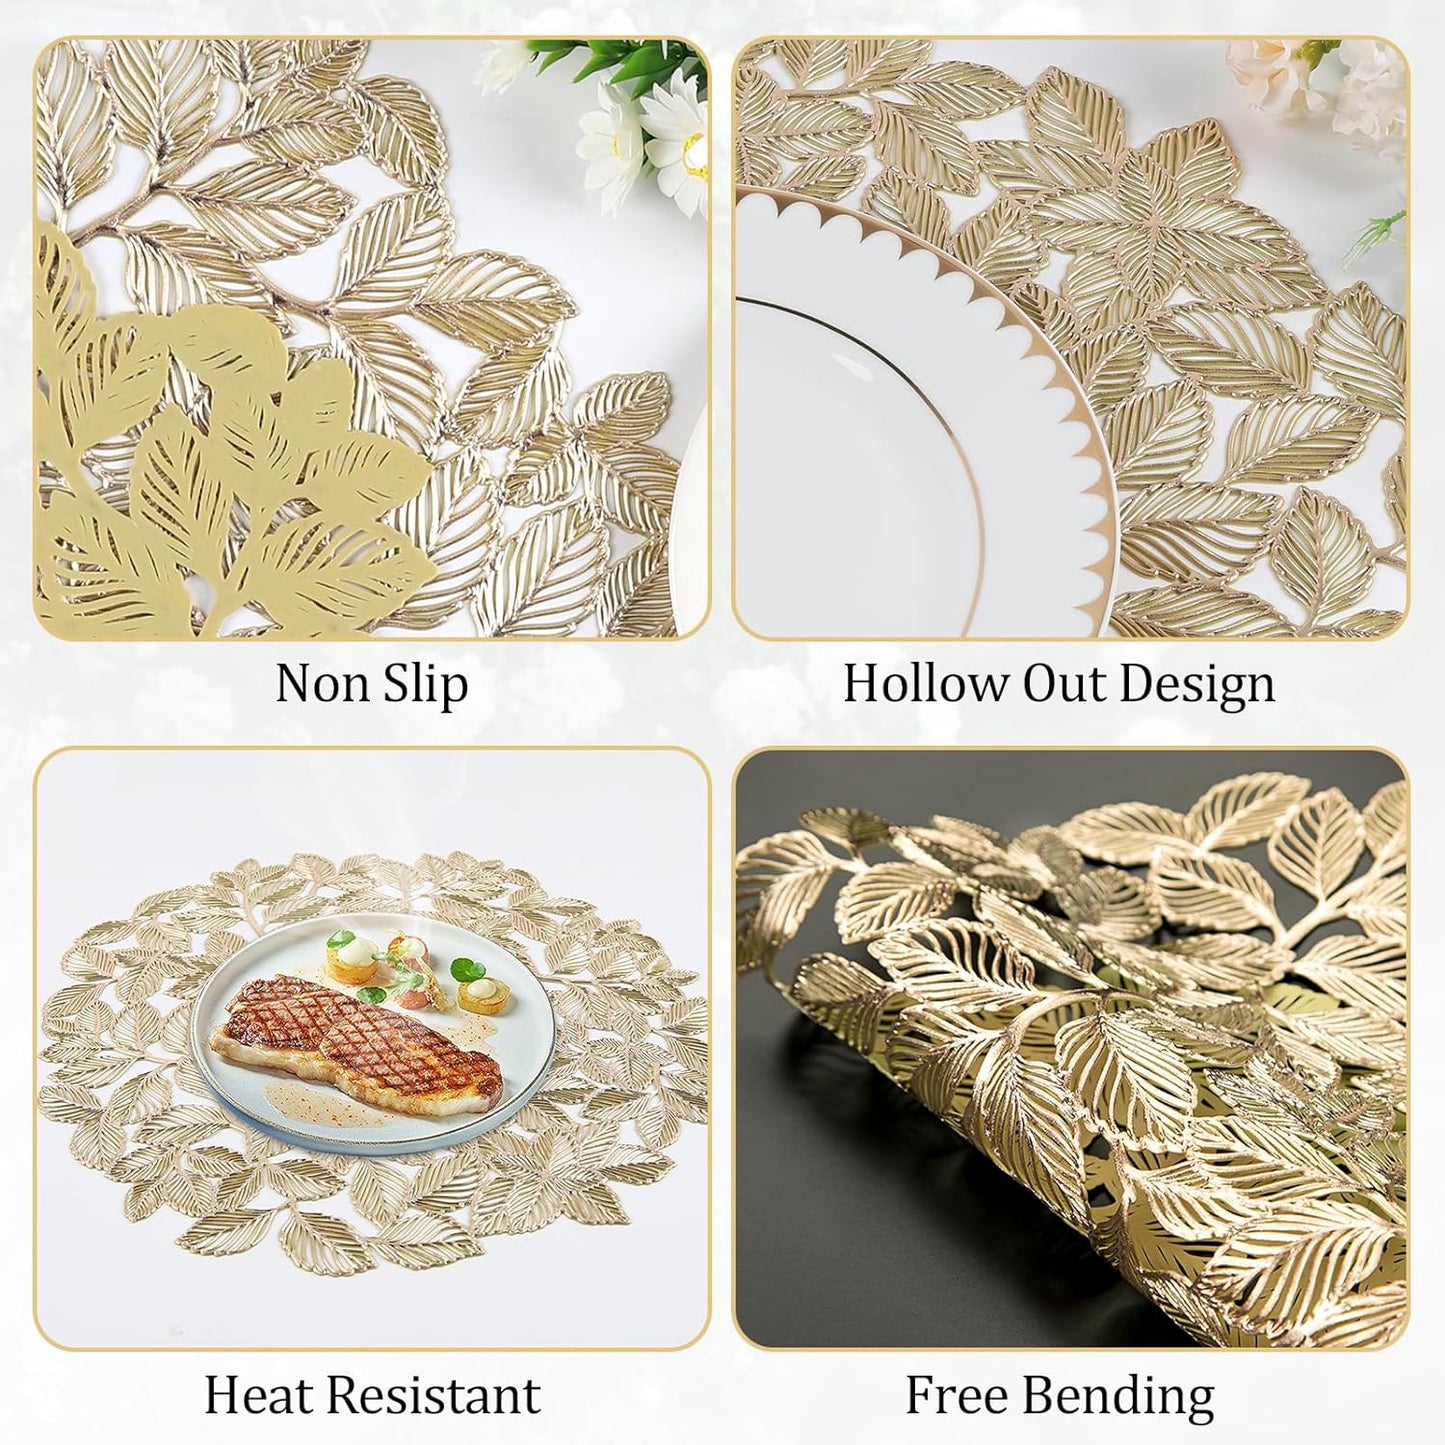 Round Gold Placemats Set of 12 Metallic Leaf Pressed Vinyl Table Dining Mats Waterproof Decorations Placemats for Gathering Housewarming Activities